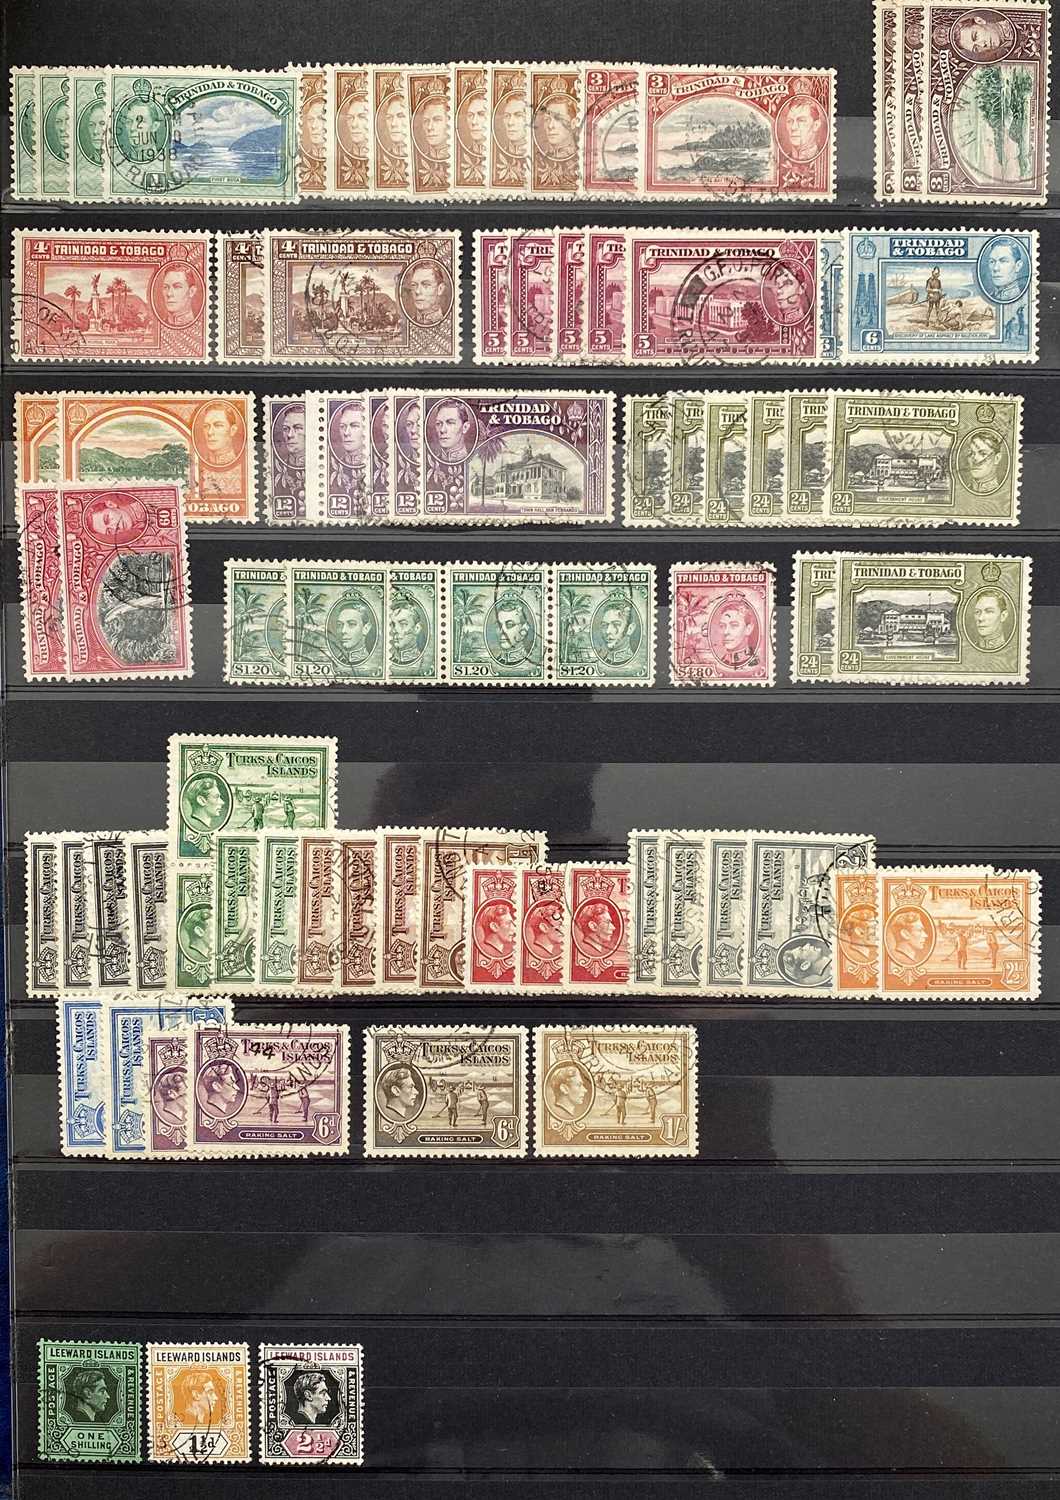 COMMONWEALTH GV1 - fine used collection of many countries, full sets and top values, good quality - Image 14 of 17